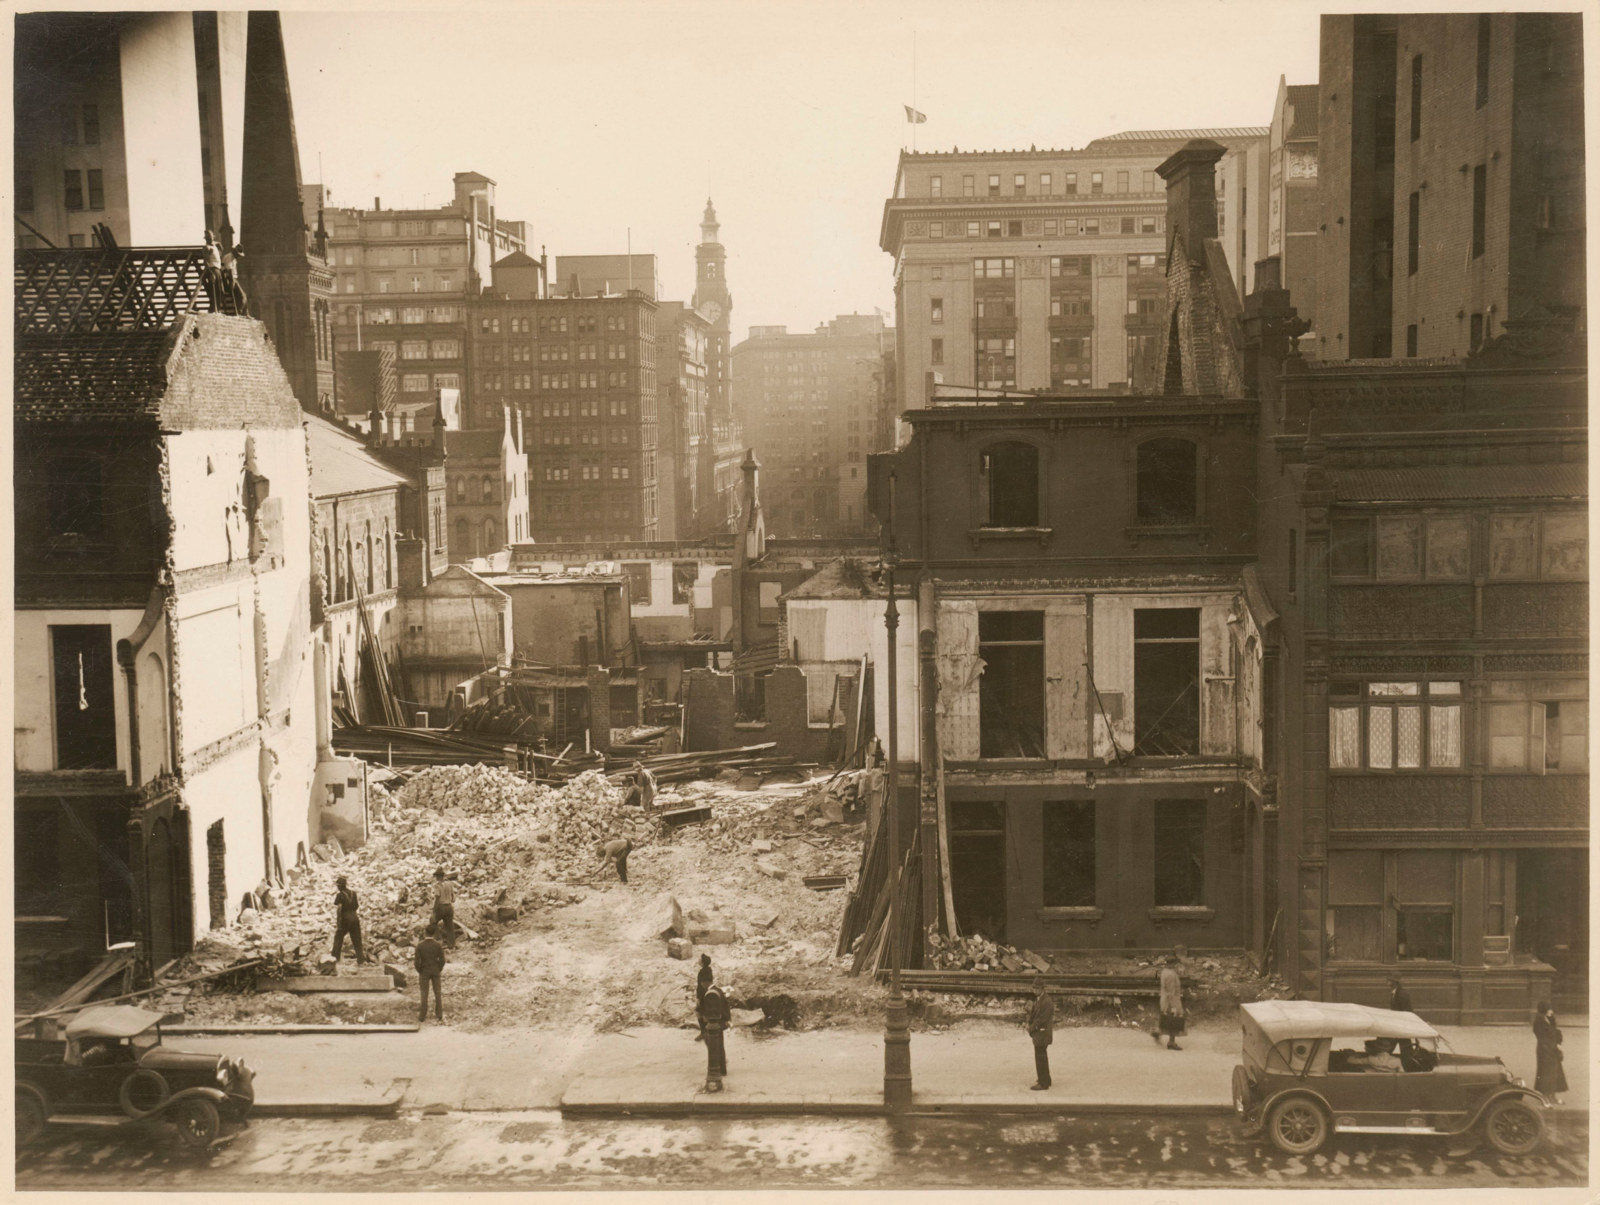 Sepia photograph of demolished buildings in Sydney during the 1930s.